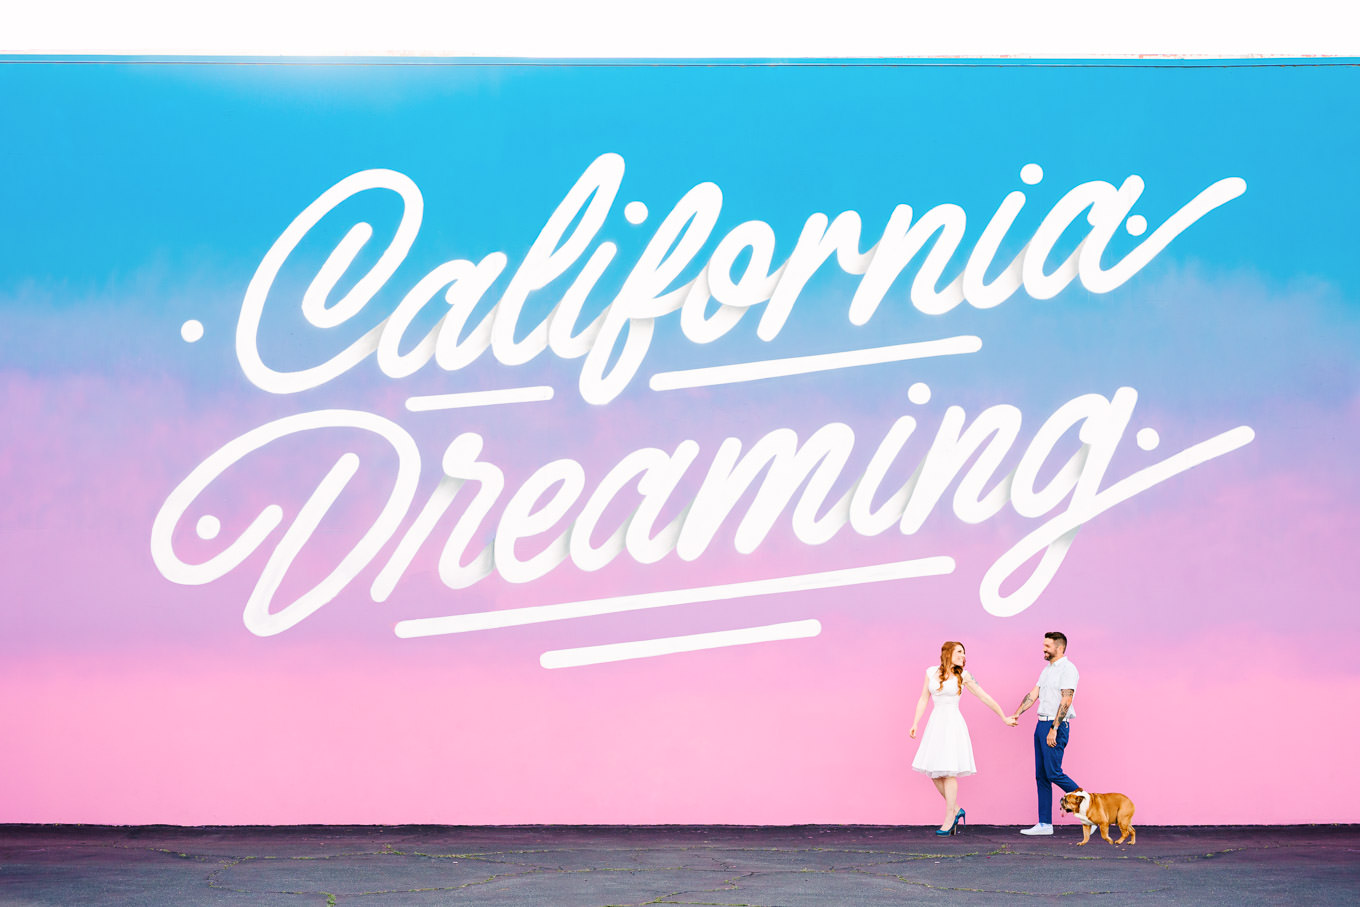 California Dreaming Mural engagement session | Wedding and elopement photography roundup | Los Angeles and Palm Springs photographer | #losangeleswedding #palmspringswedding #elopementphotographer Source: Mary Costa Photography | Los Angeles